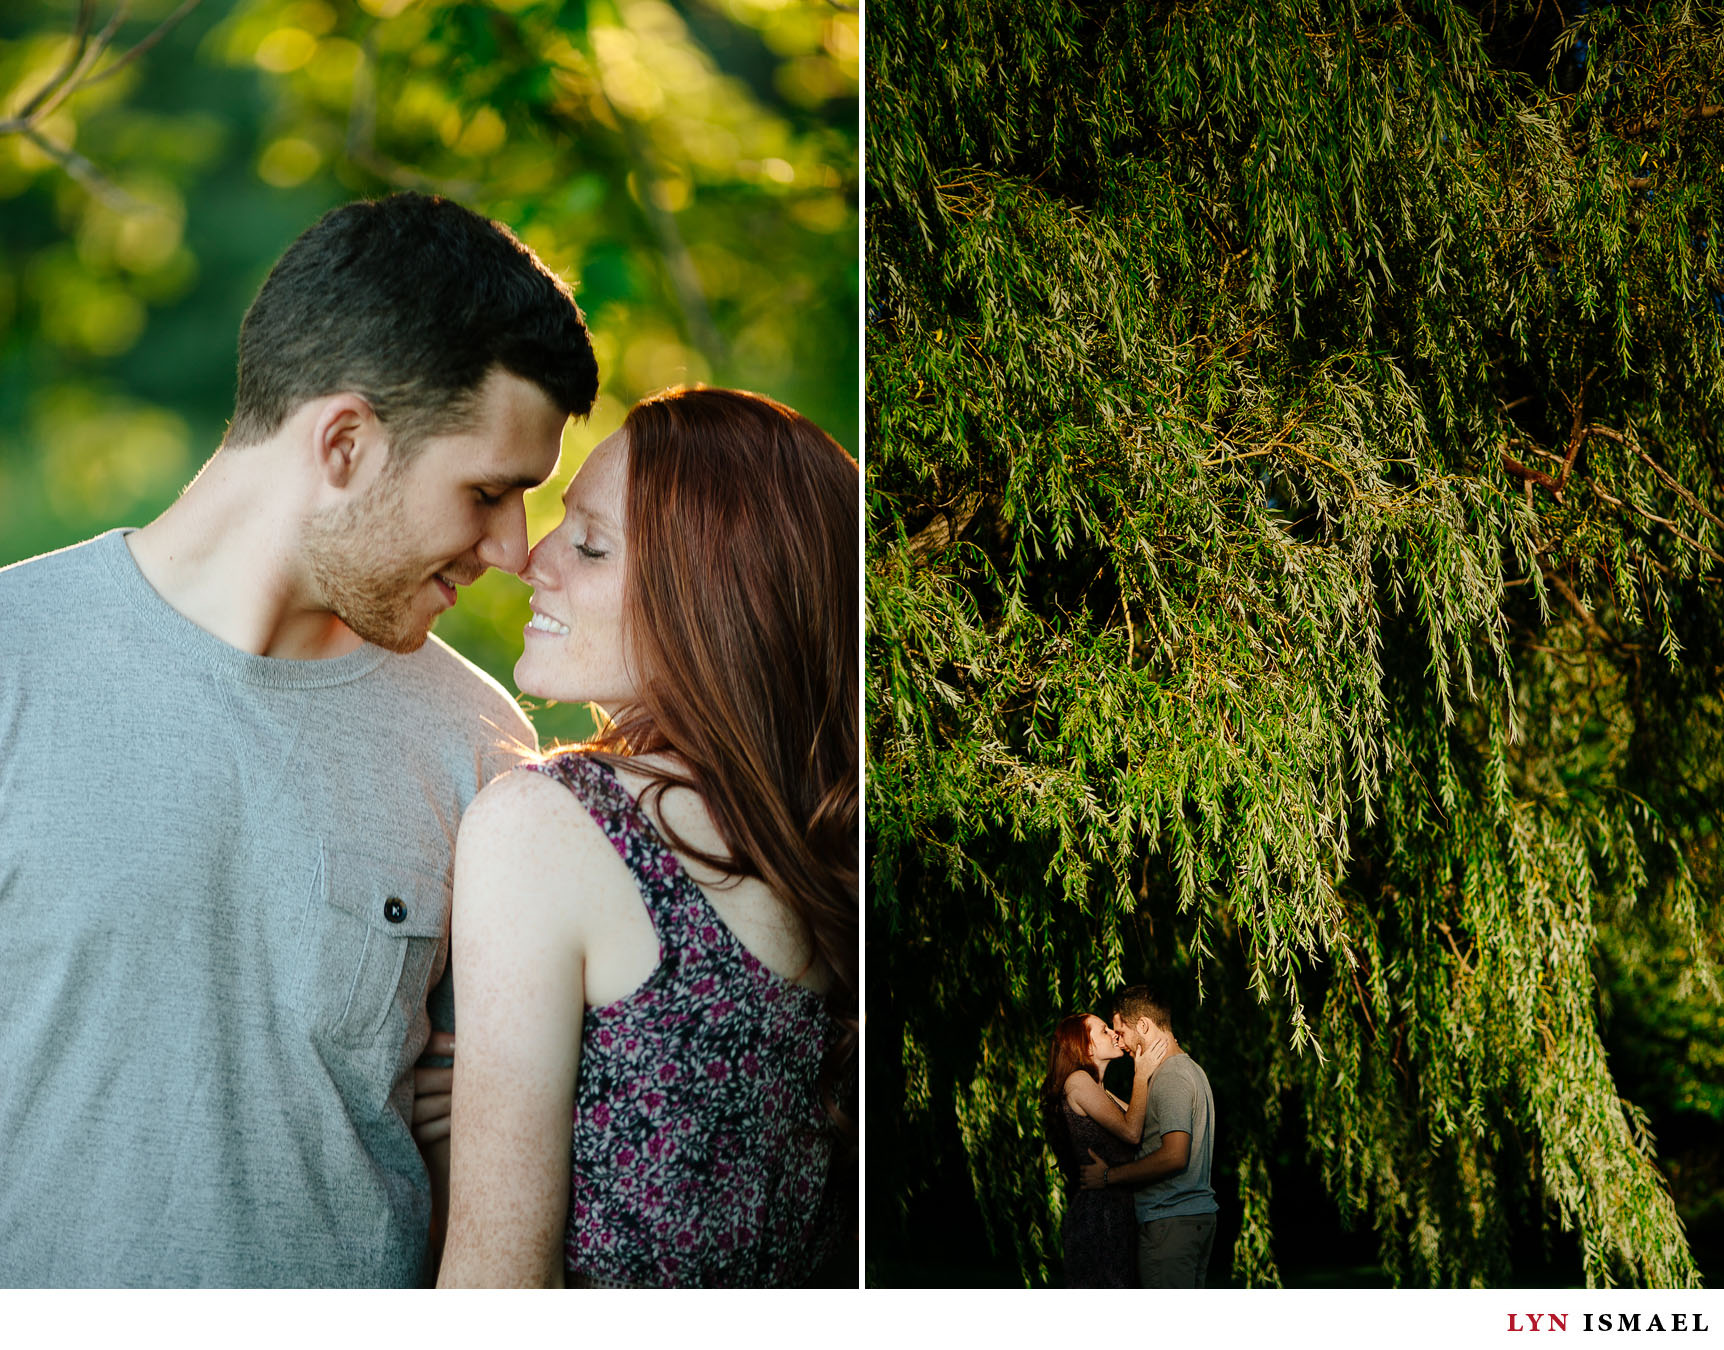 Kissing under a willow tree.